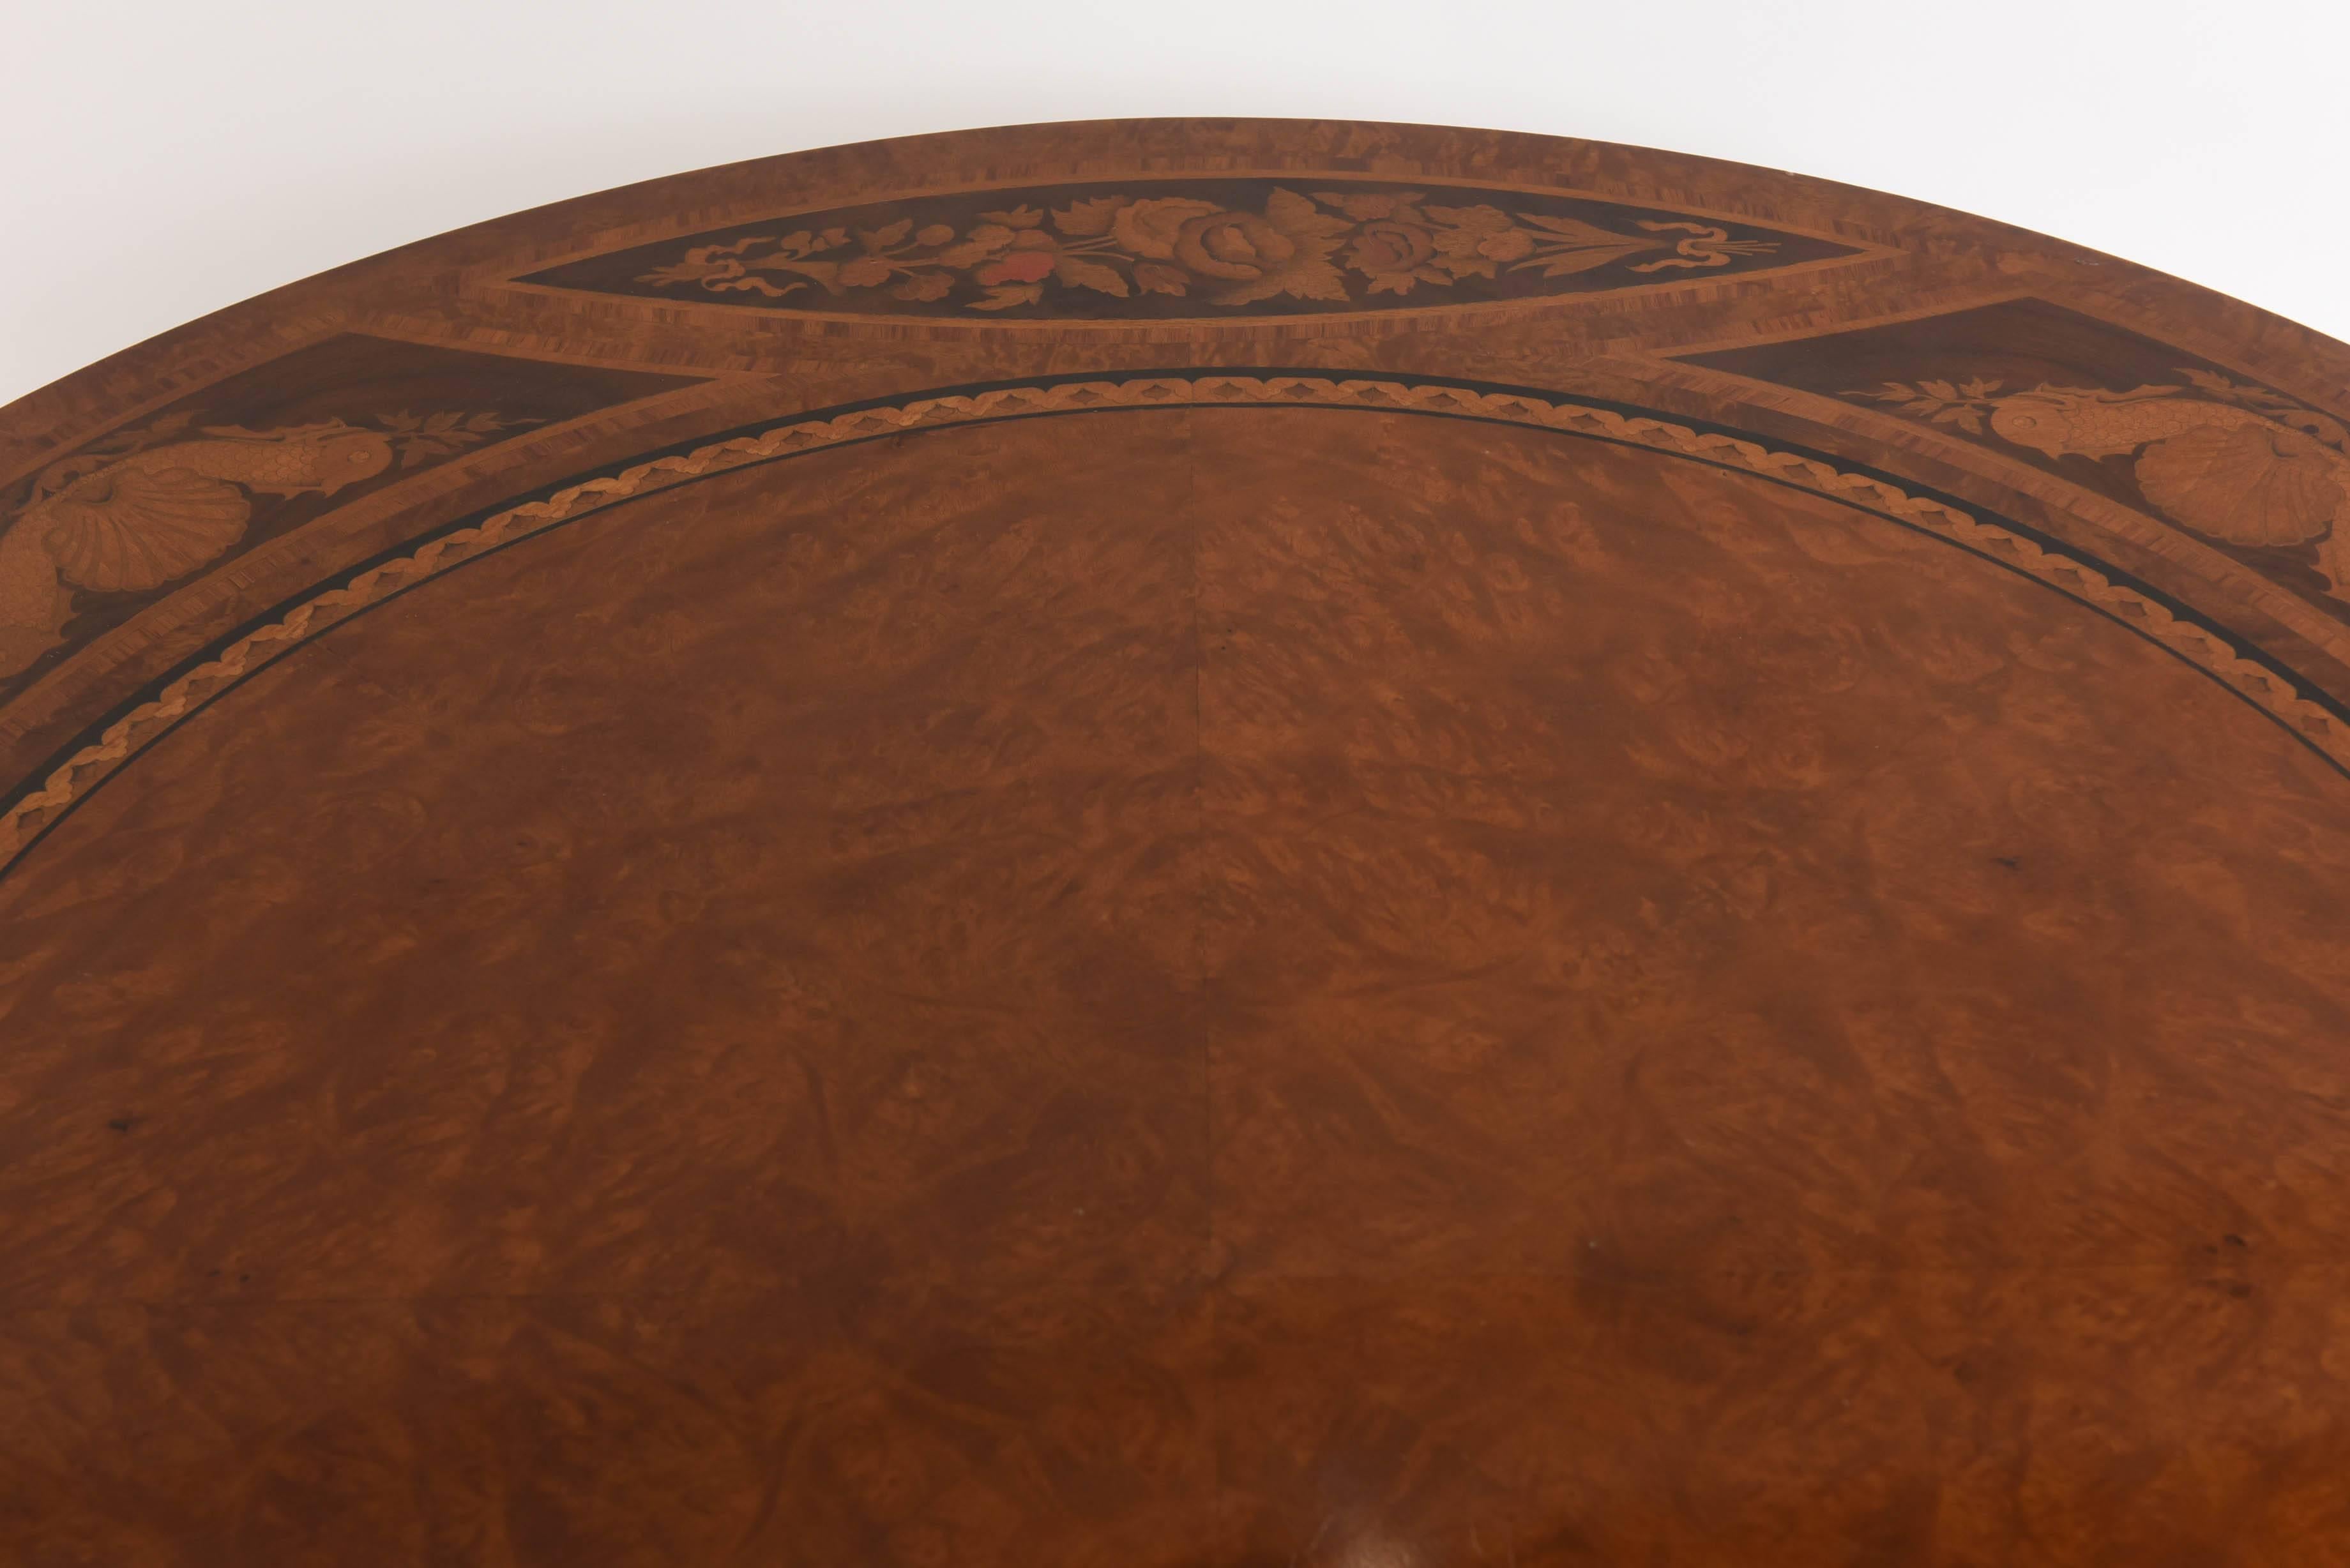 Giltwood Neoclassical Style Center Table with Marquetry Top, Rho Mobili D' Epoca, Italy